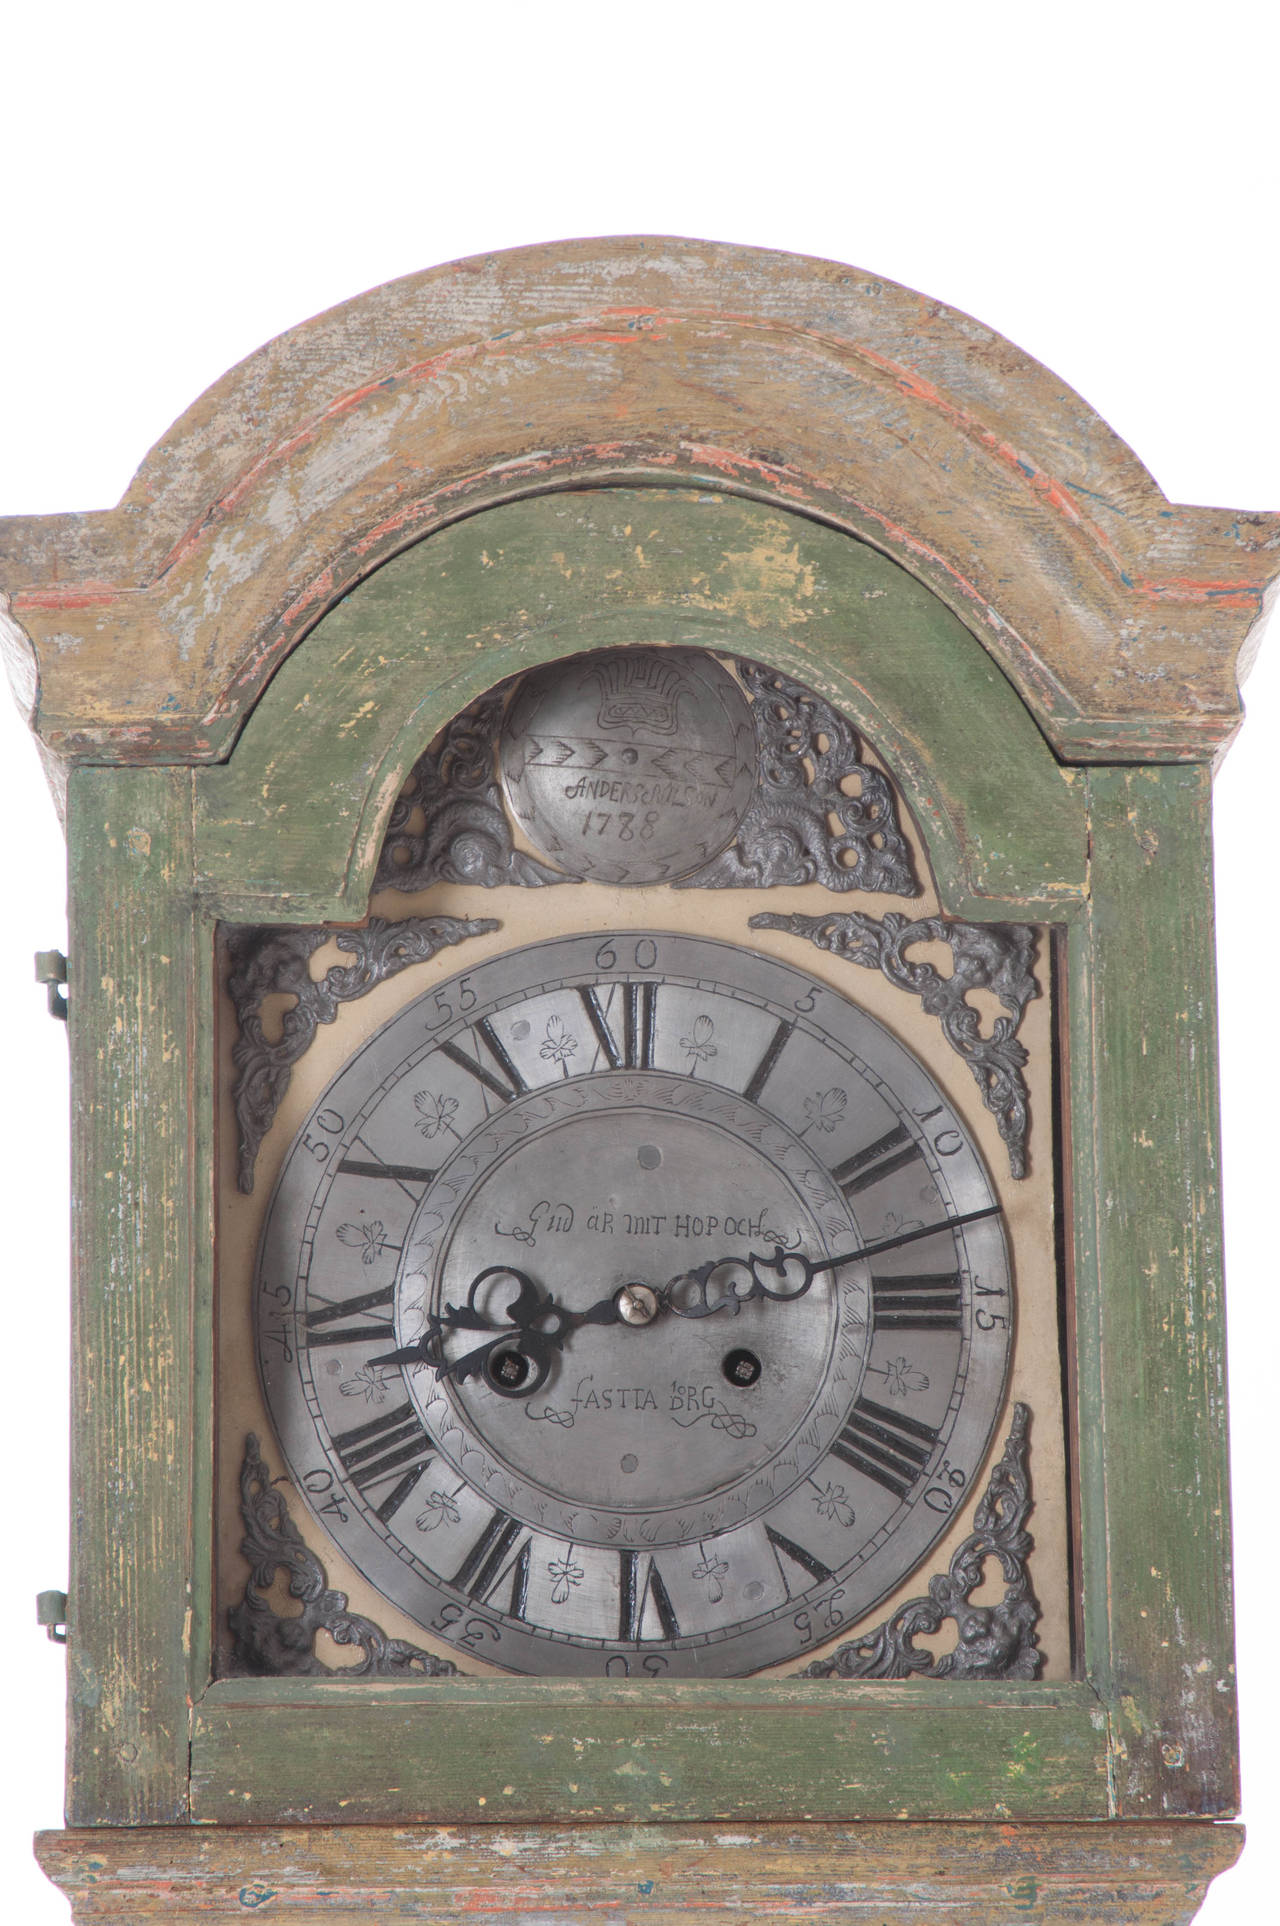 An outstanding Swedish case clock all handmade from 1788. The banjo style case clock is made stacking boards to create the depth as you can see on the detail photos and has been stripped and repainted over many times before. The clock face is made